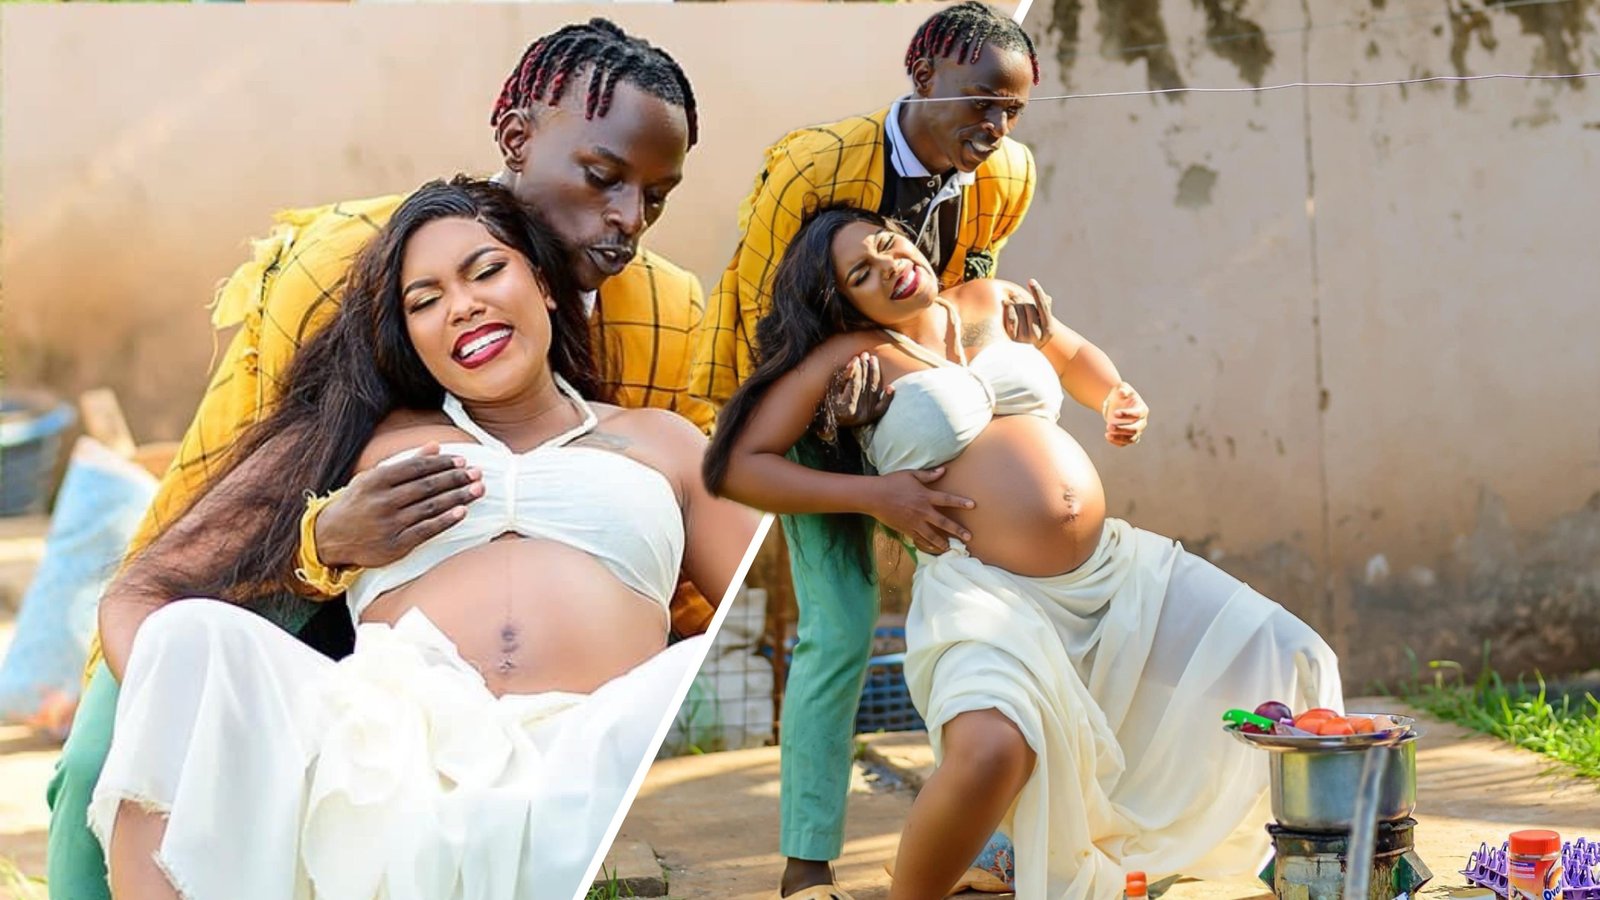 mikey-seems-2-funny,-bash-dazzle-in-hilarious-maternity-photoshoot-(photos)